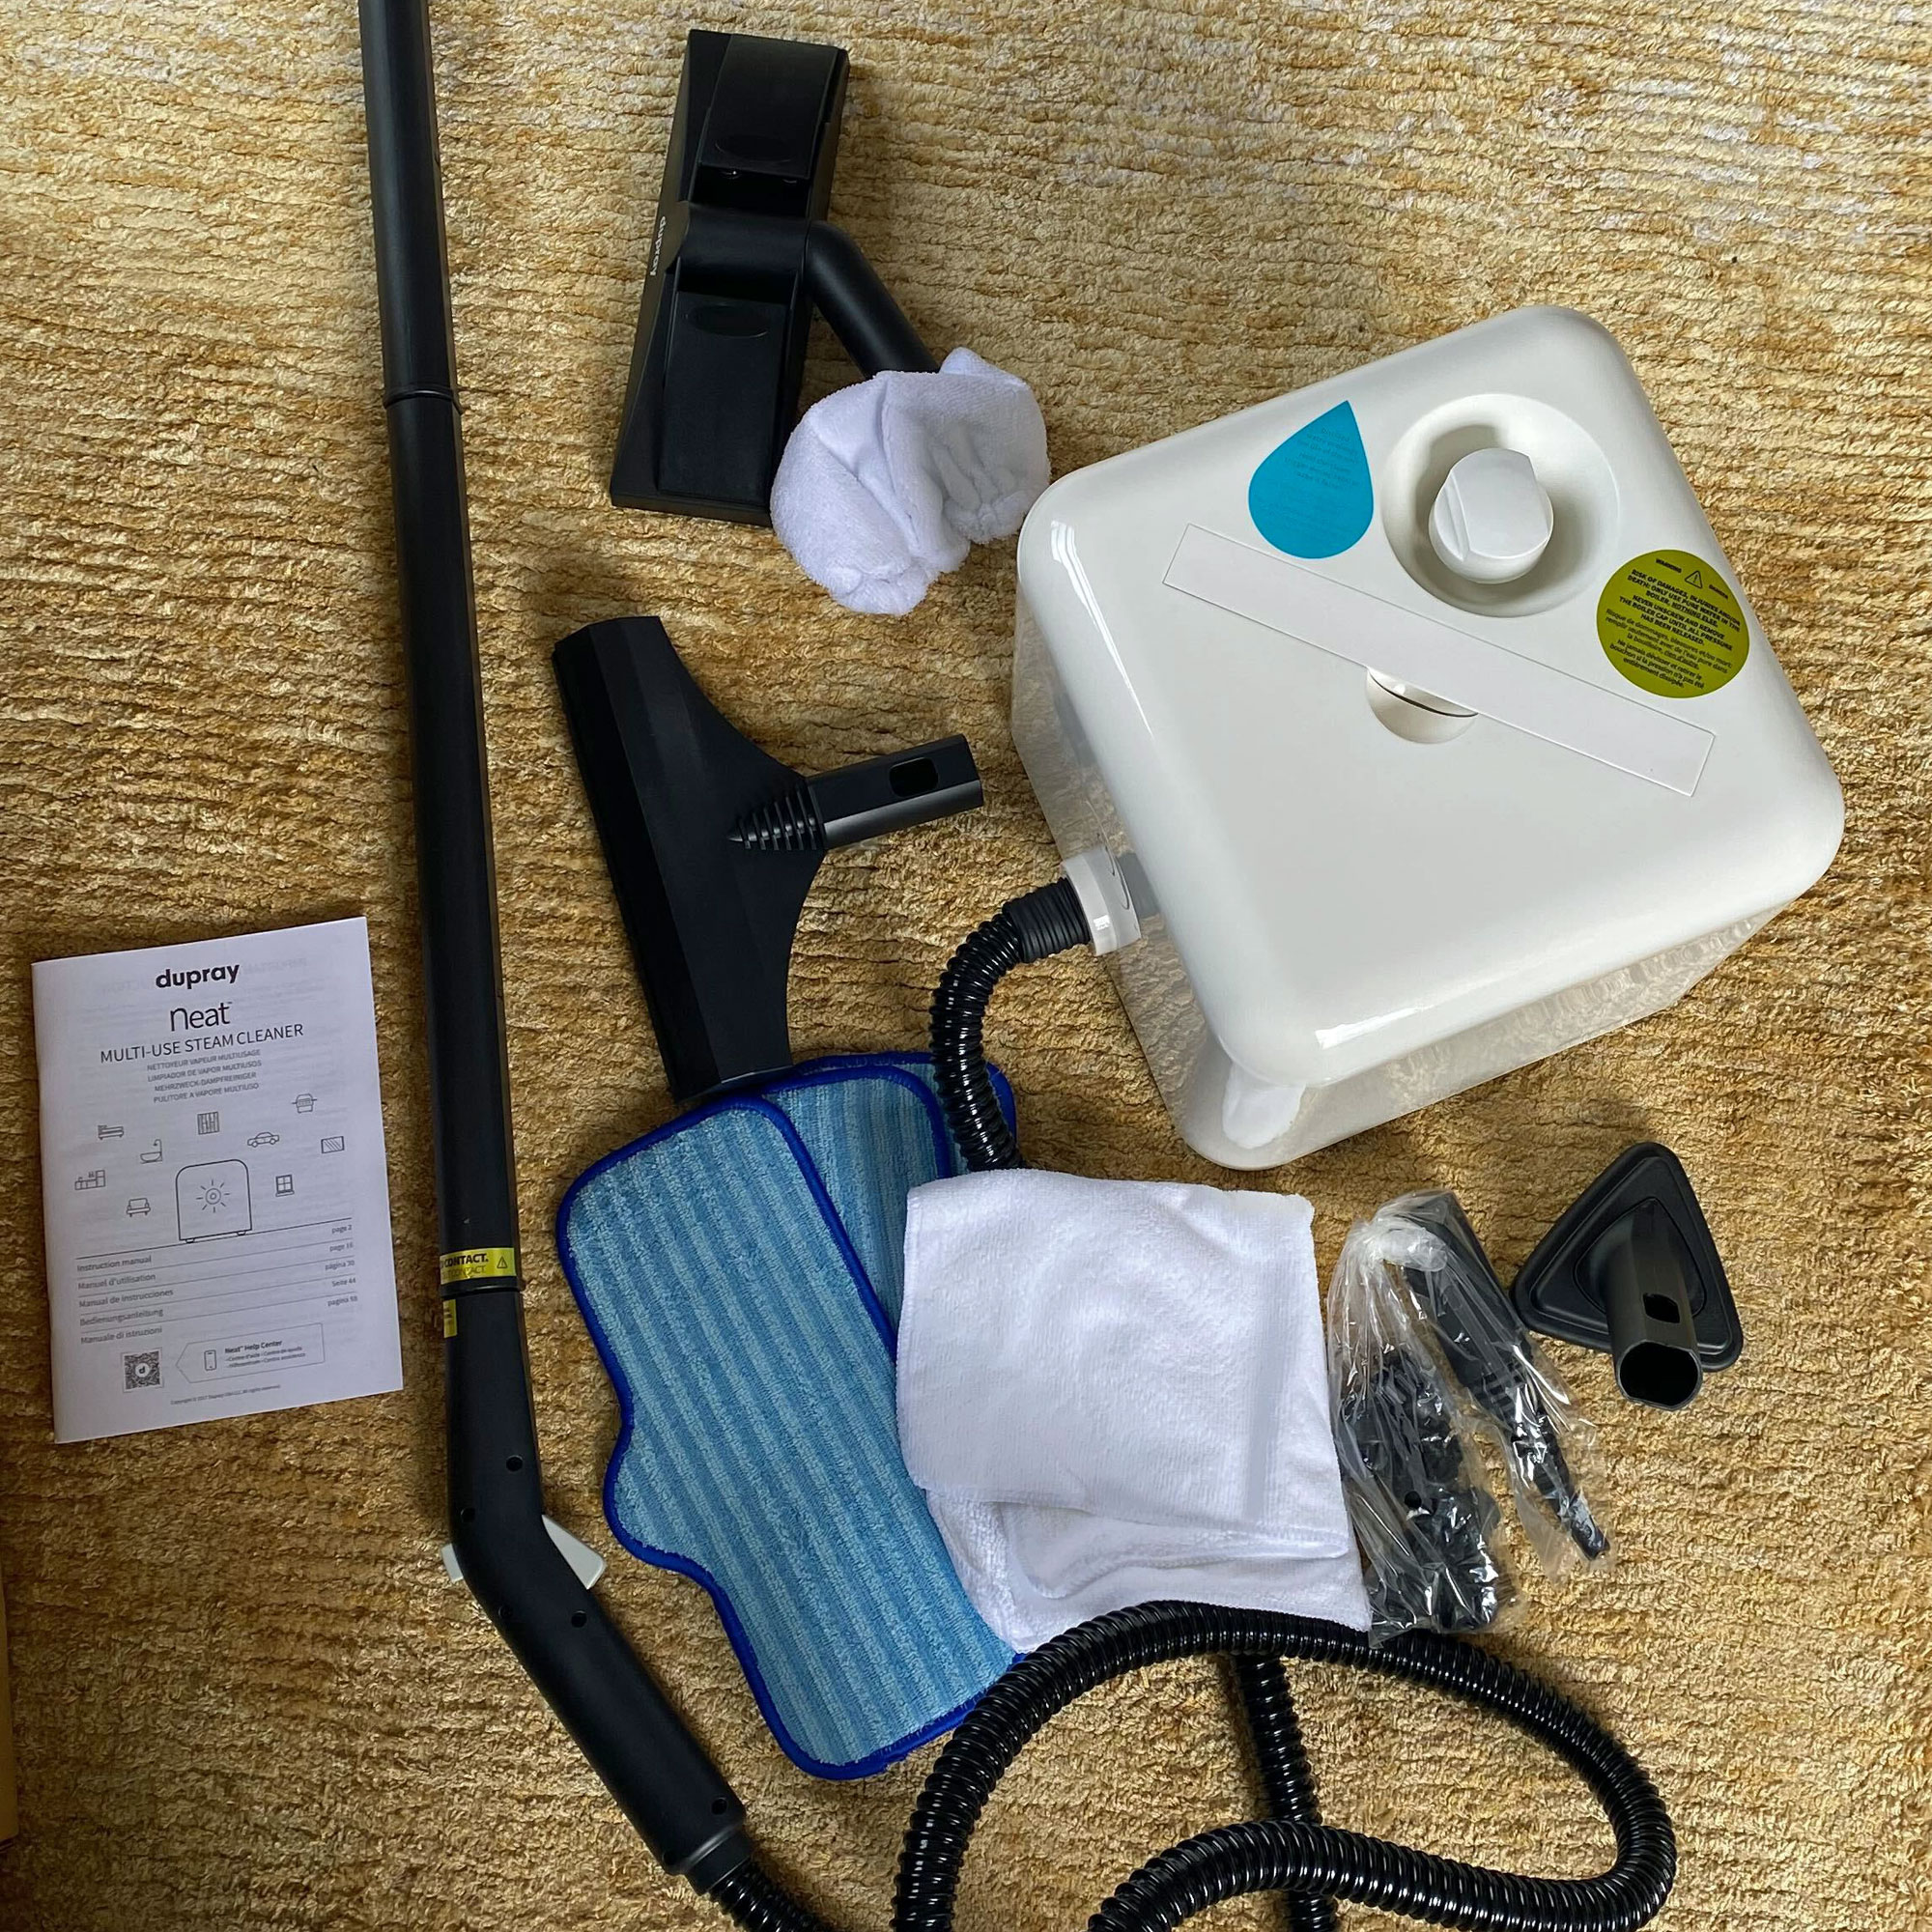 Dupray neat steam cleaner with accessories